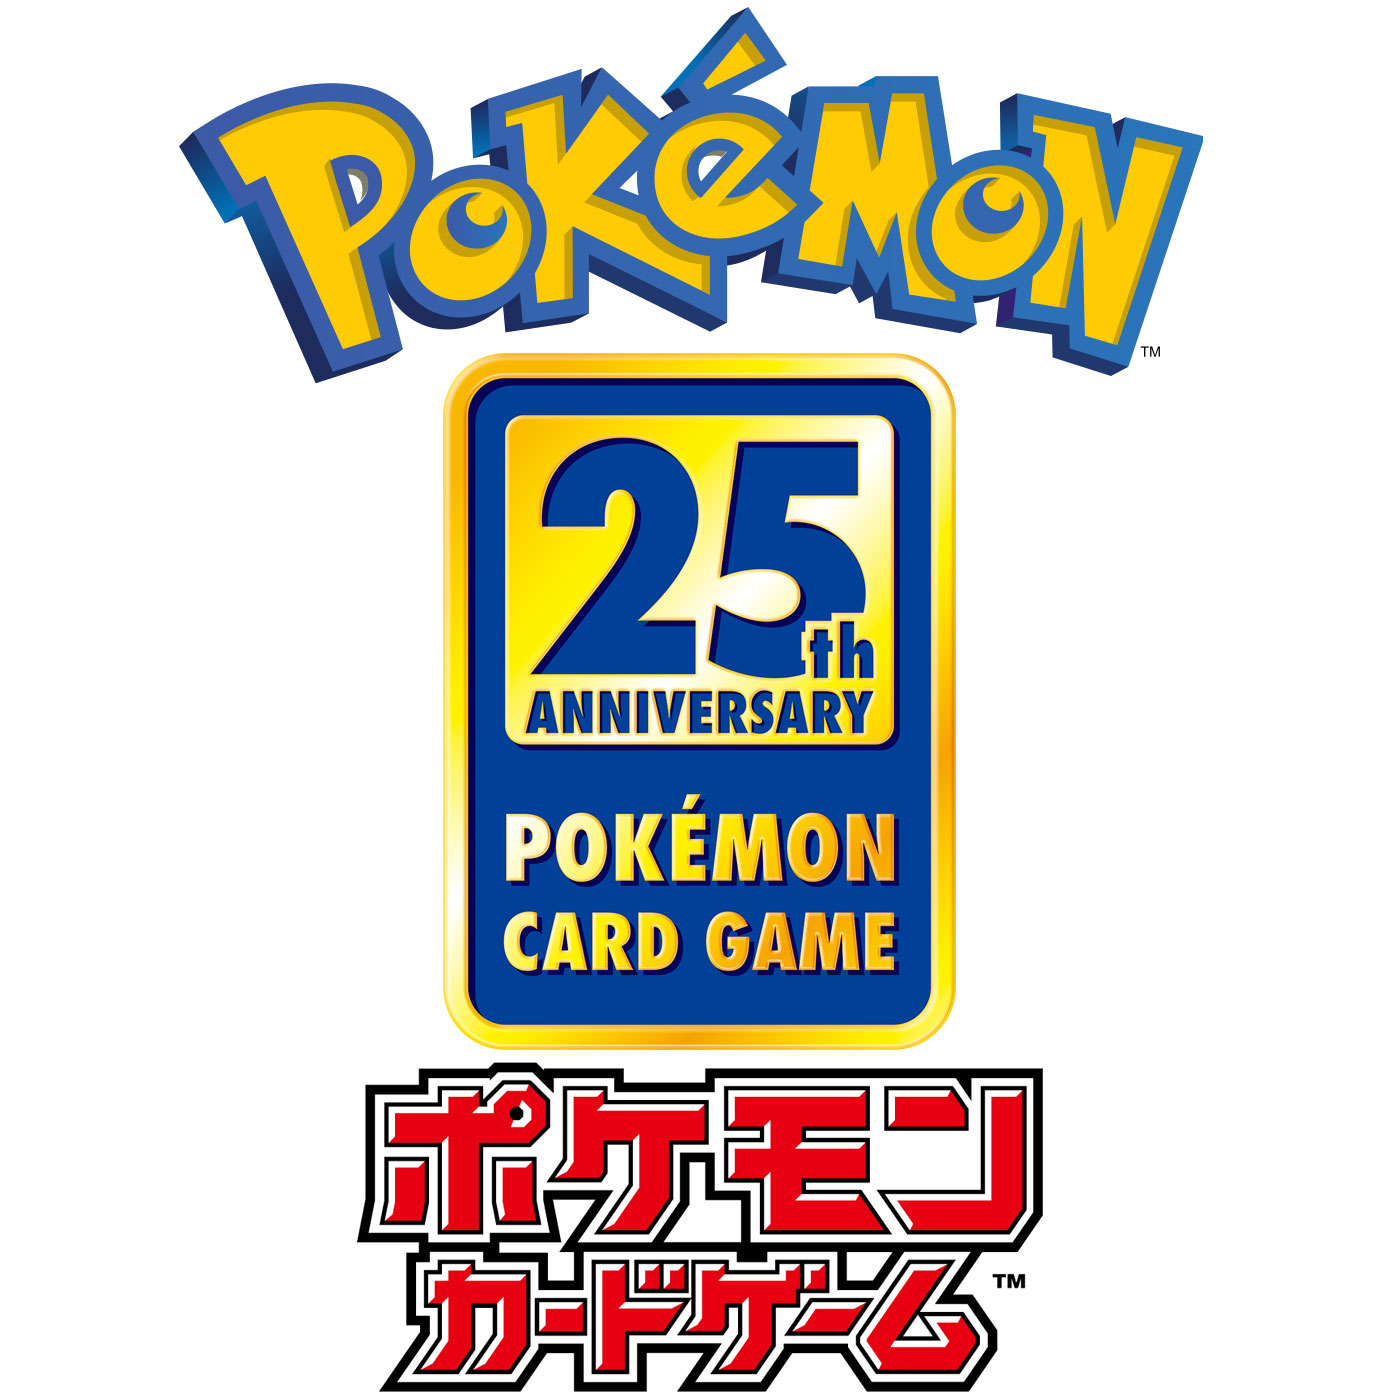 Pokémon 25th ANNIVERSARY BOOSTER COLLECTION BOX Sword Shield Promo Card Pack 25th ANNIVERSARY Edition